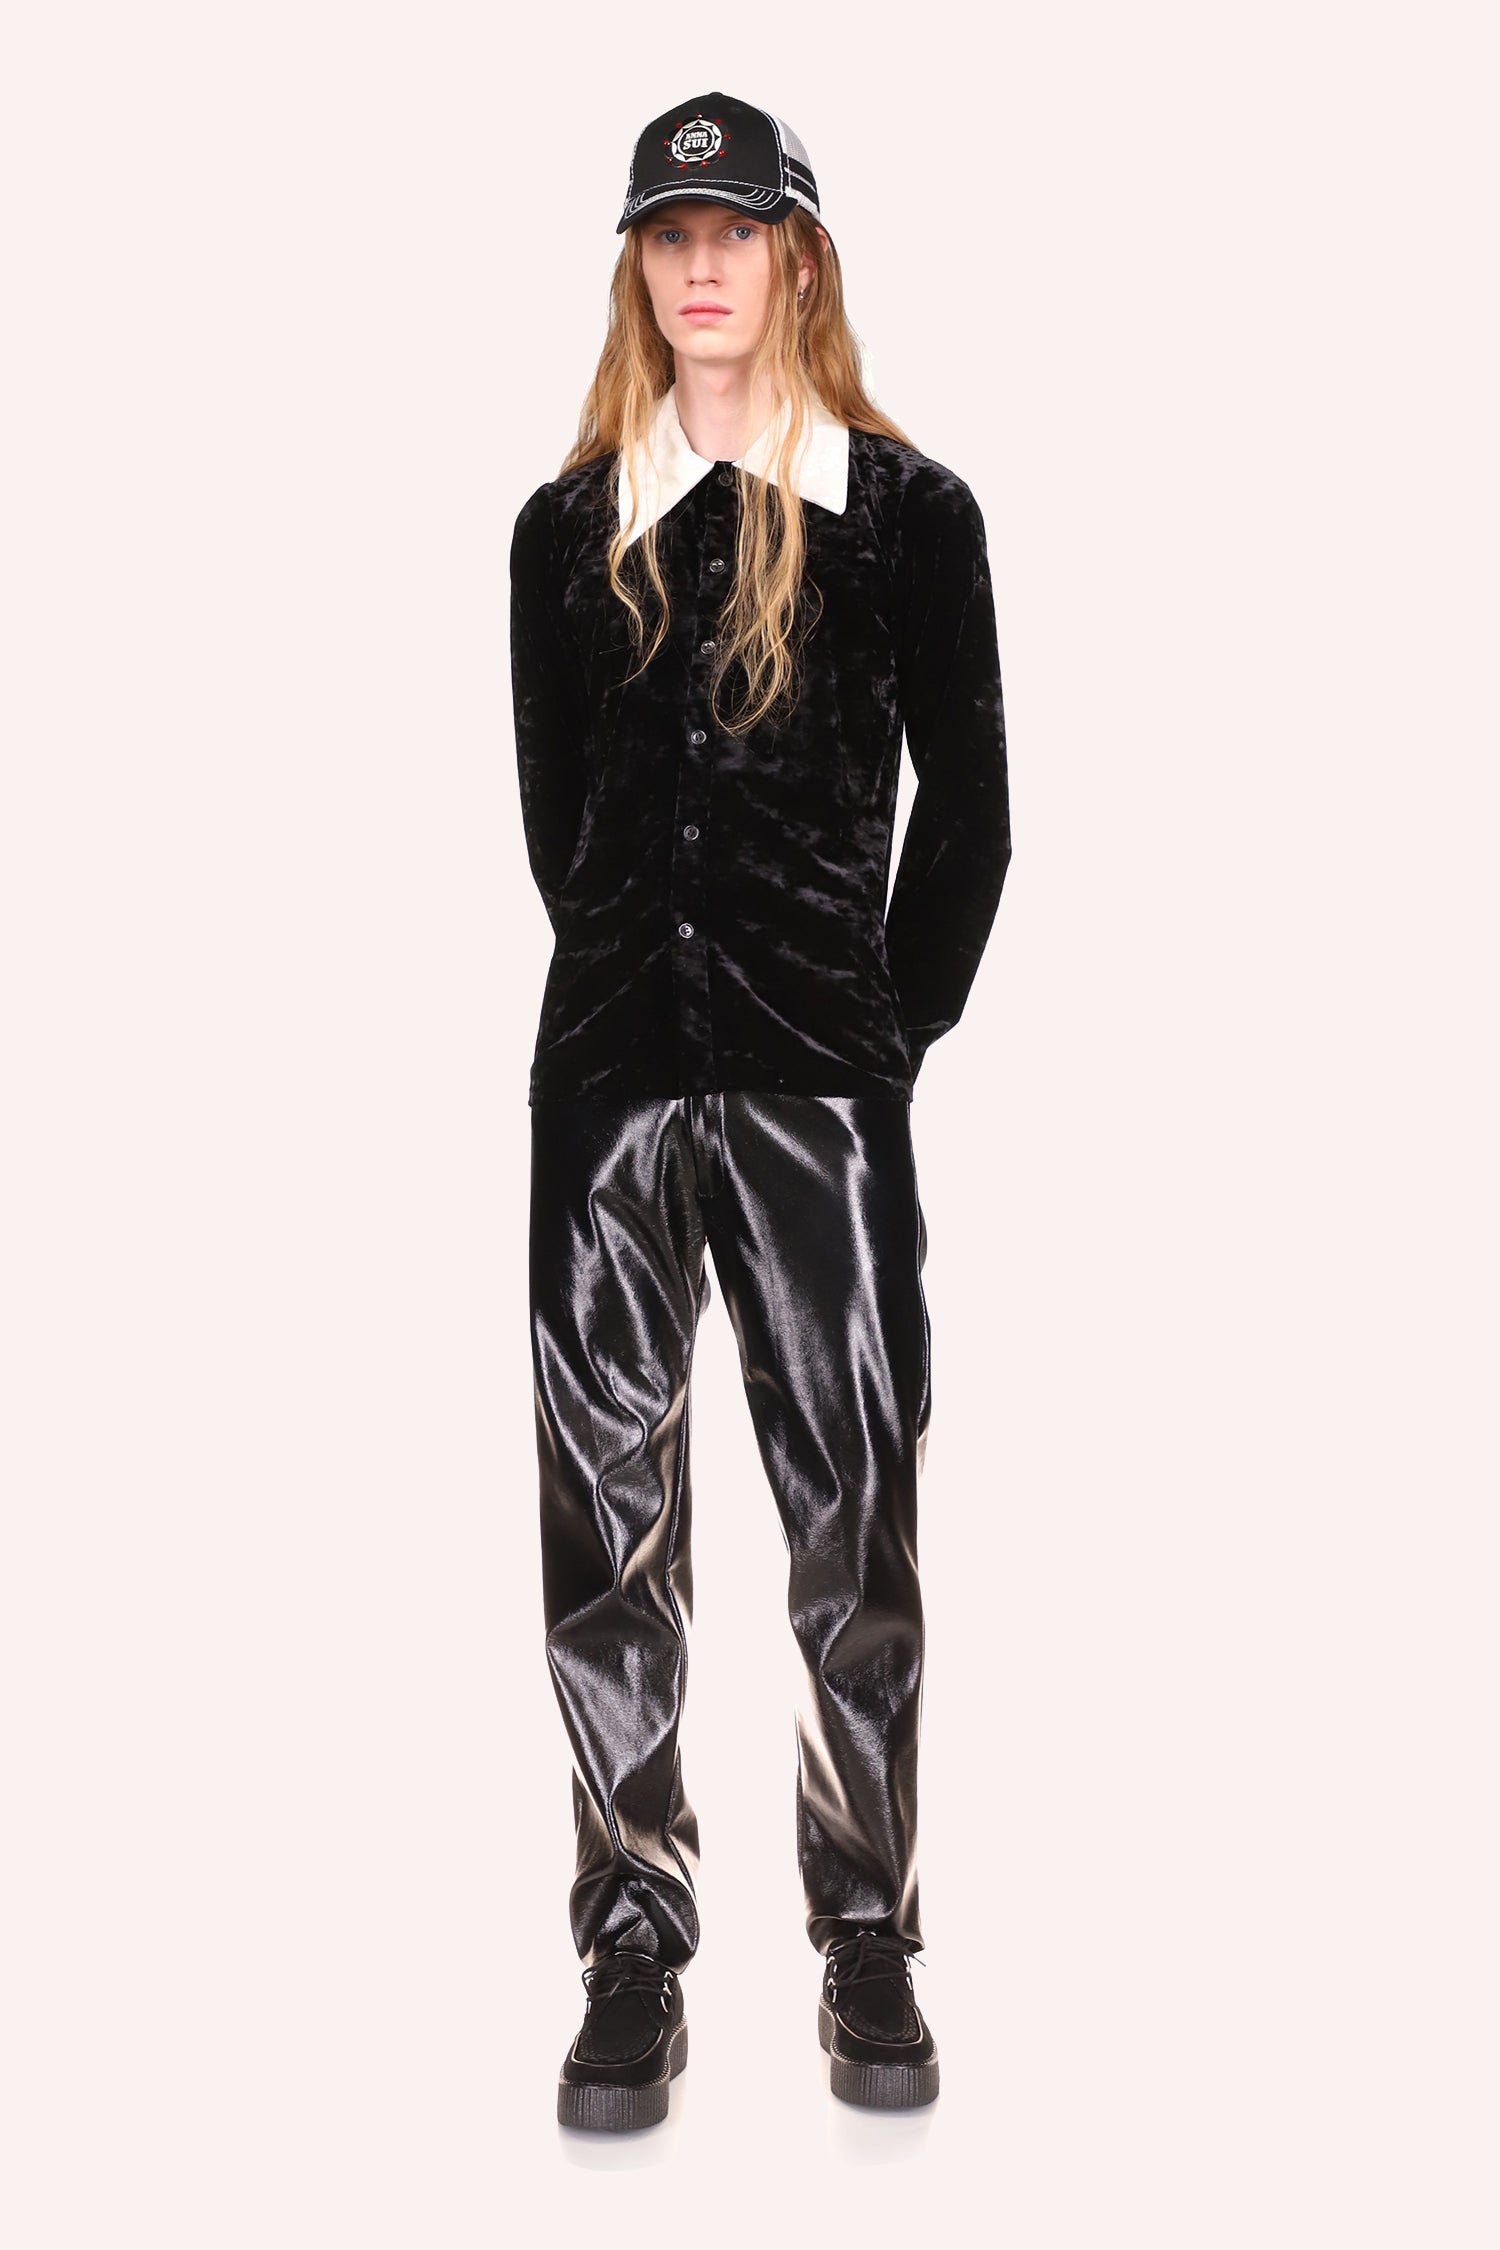 Stretch Velvet 6-Buttons Top Black perfect match with Genderless Black Patent Pants